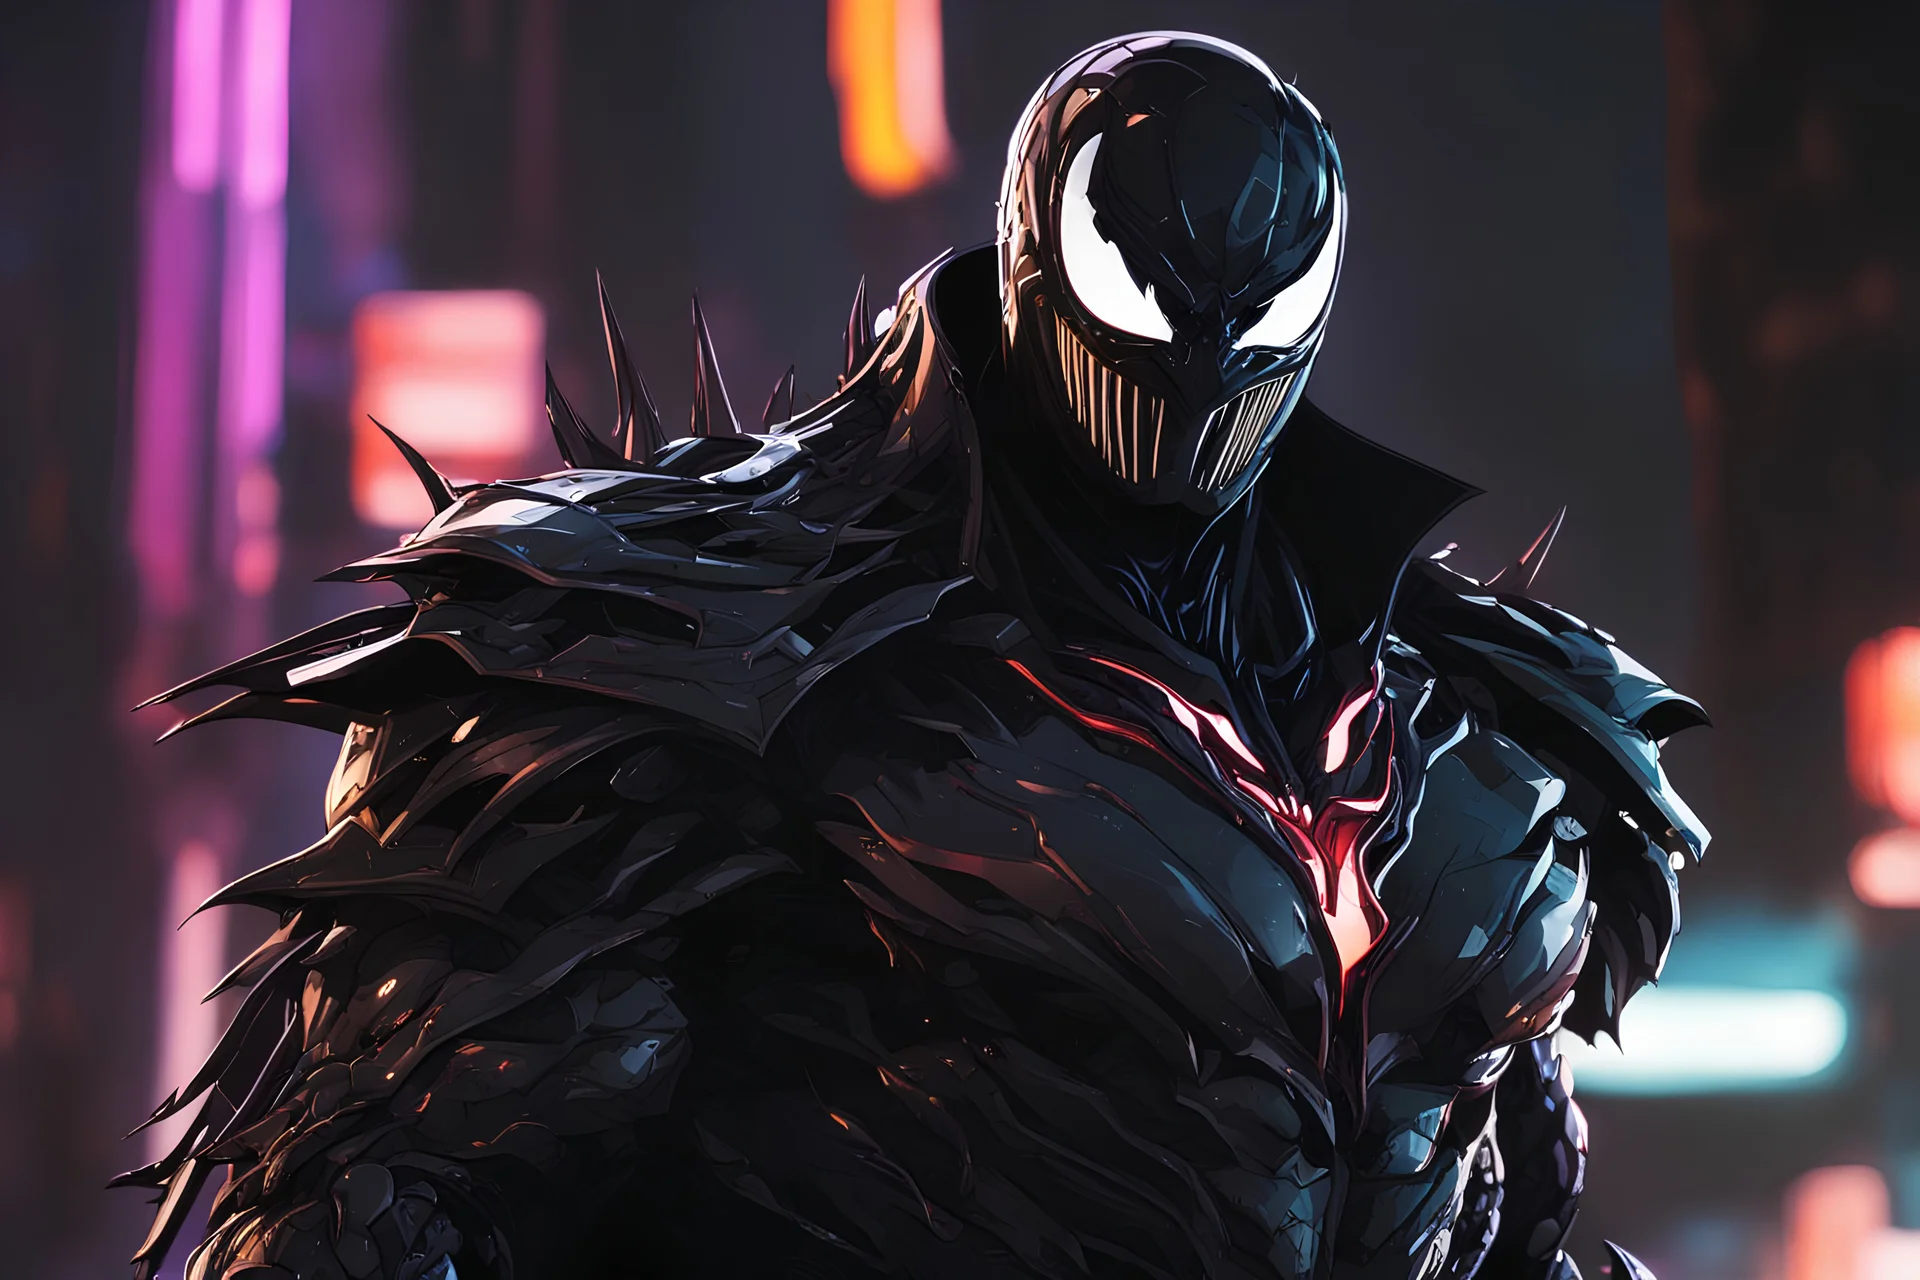 Venom Shredder in 8k solo leveling shadow artstyle, machine them, close picture, rain, neon lights, intricate details, highly detailed, high details, detailed portrait, masterpiece,ultra detailed, ultra quality